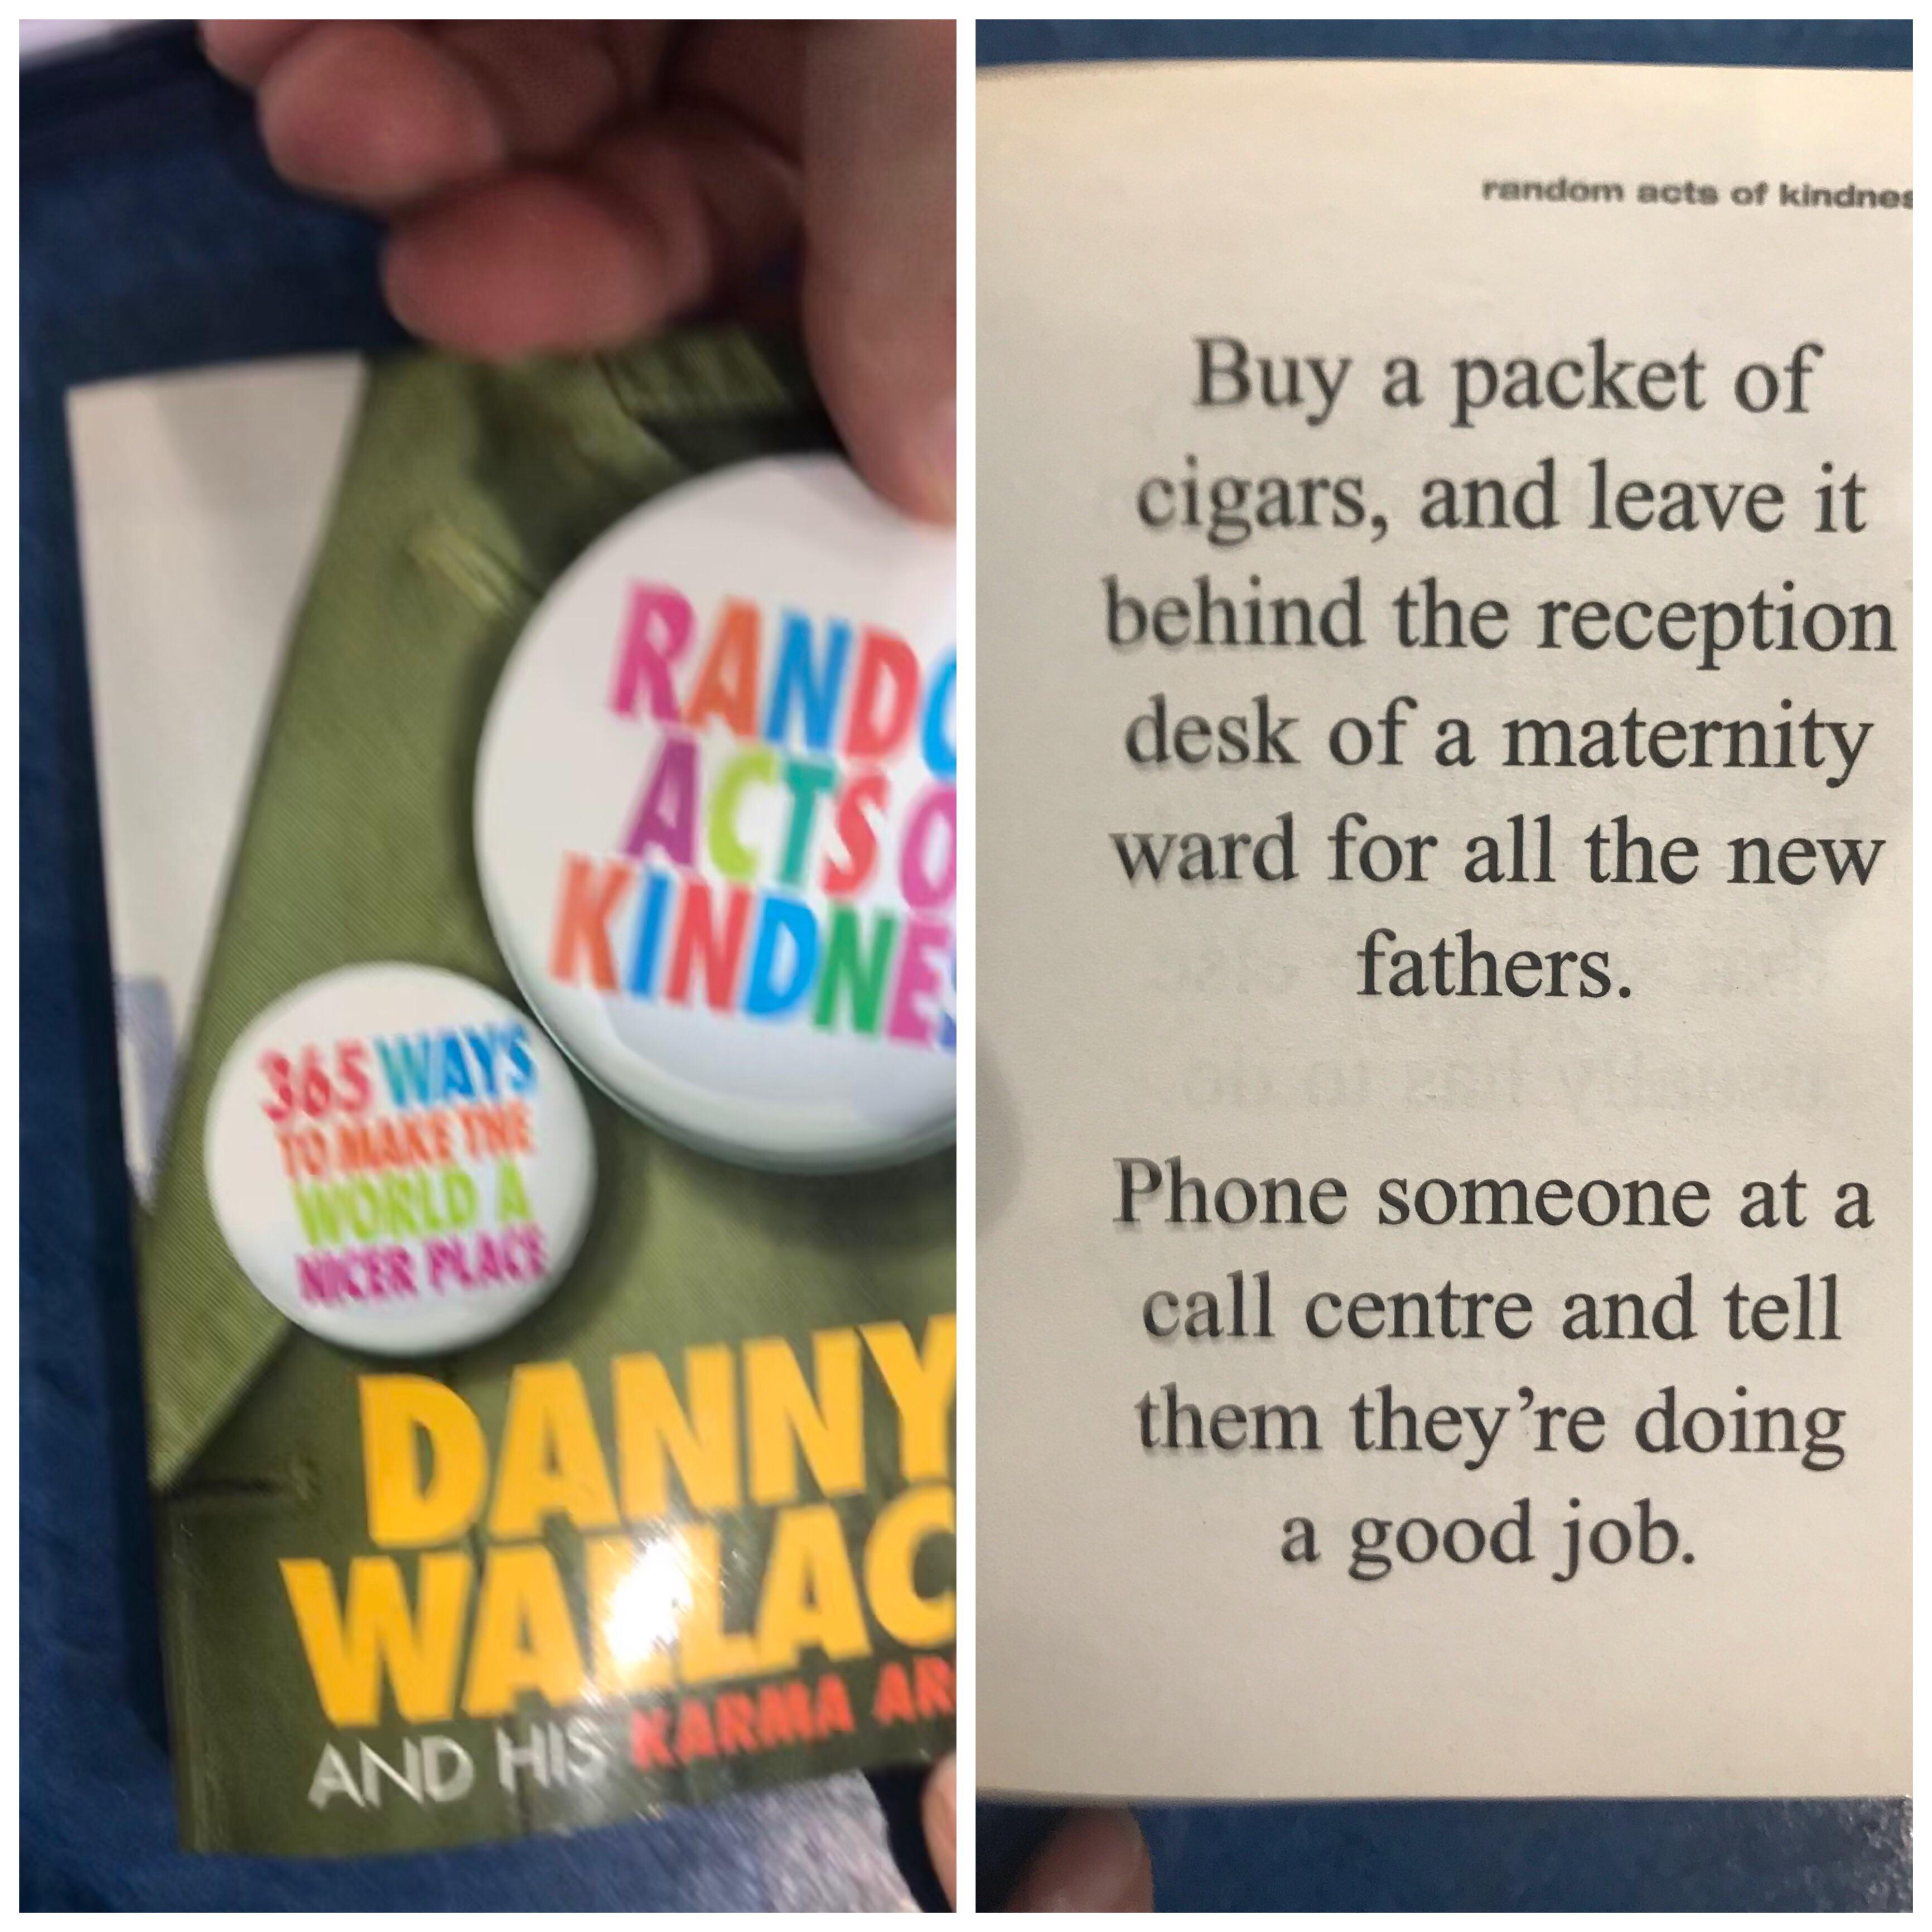 random acts of kindnes Buy a packet of cigars, and leave it behind the reception desk of a maternity ward for all the new fathers. 365 Wa Tome Phone someone at a call centre and tell them they're doing a good job.